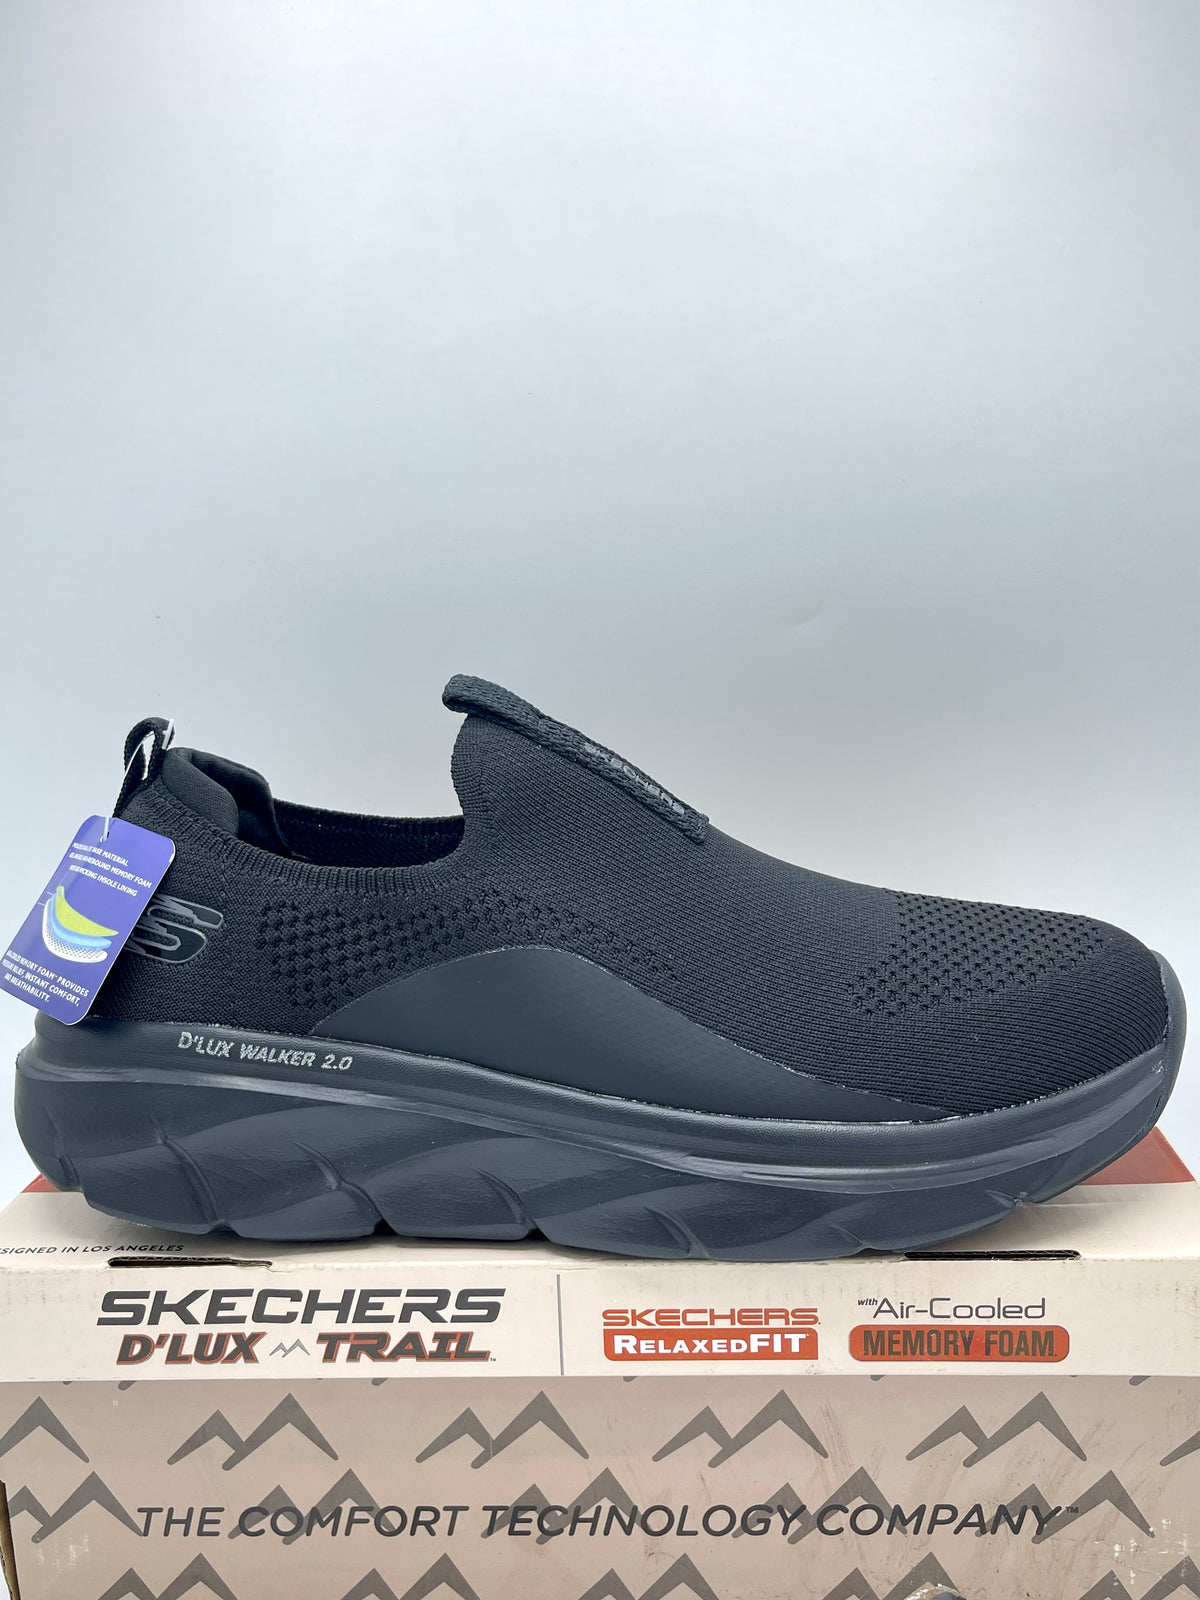 Skechers lots stock all sizes available